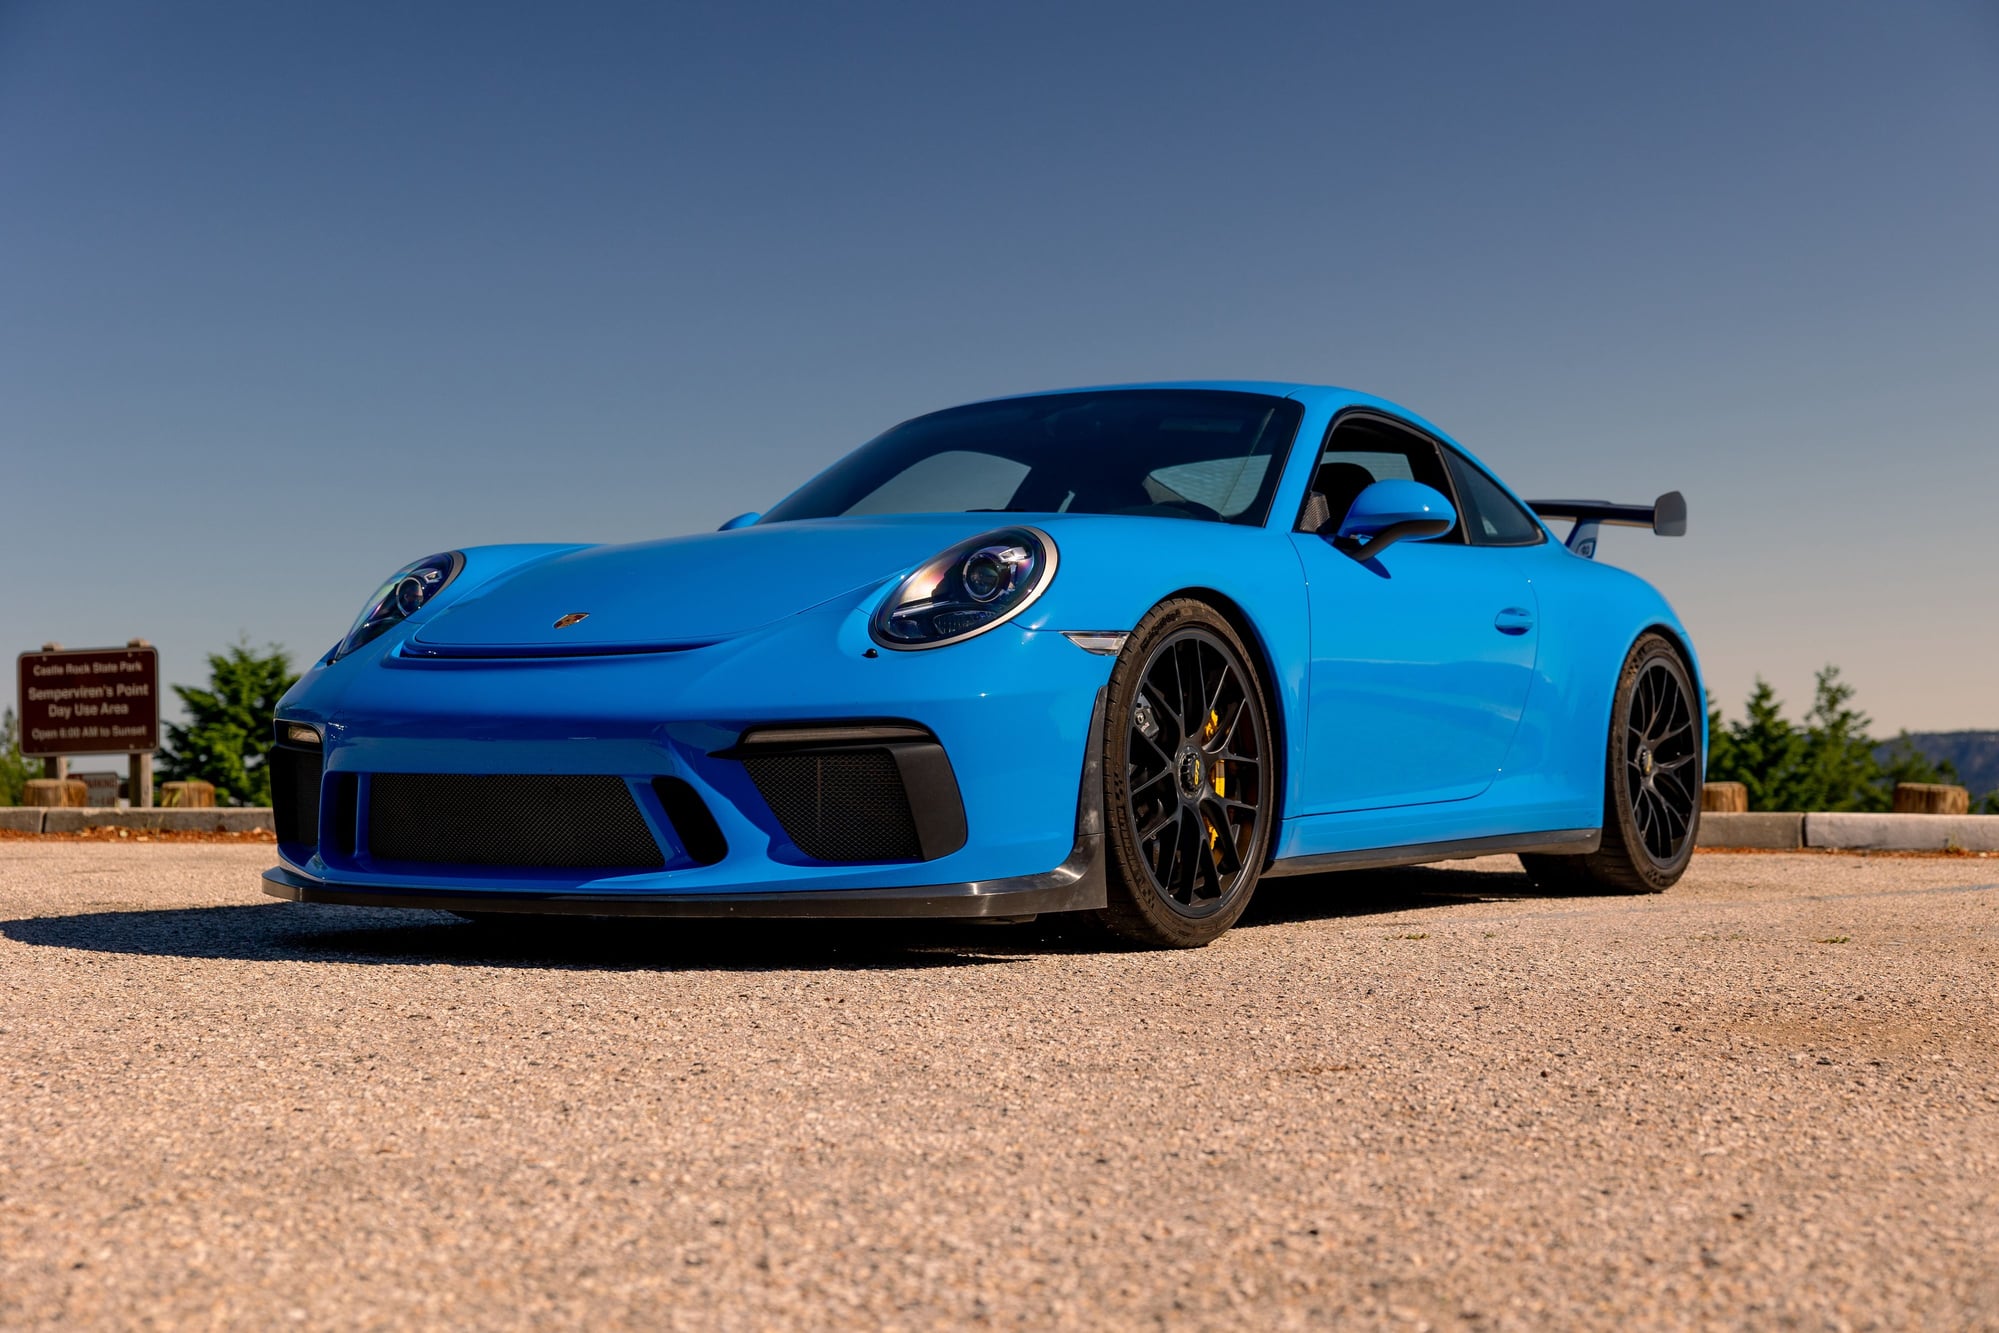 2018 Porsche GT3 - FS: 2018 911 GT3 (PTS: Voodoo Blue) 6MT - Used - VIN WP0AC2A92JS176140 - 3,744 Miles - 6 cyl - 2WD - Manual - Coupe - Blue - Redwood City, CA 94062, United States